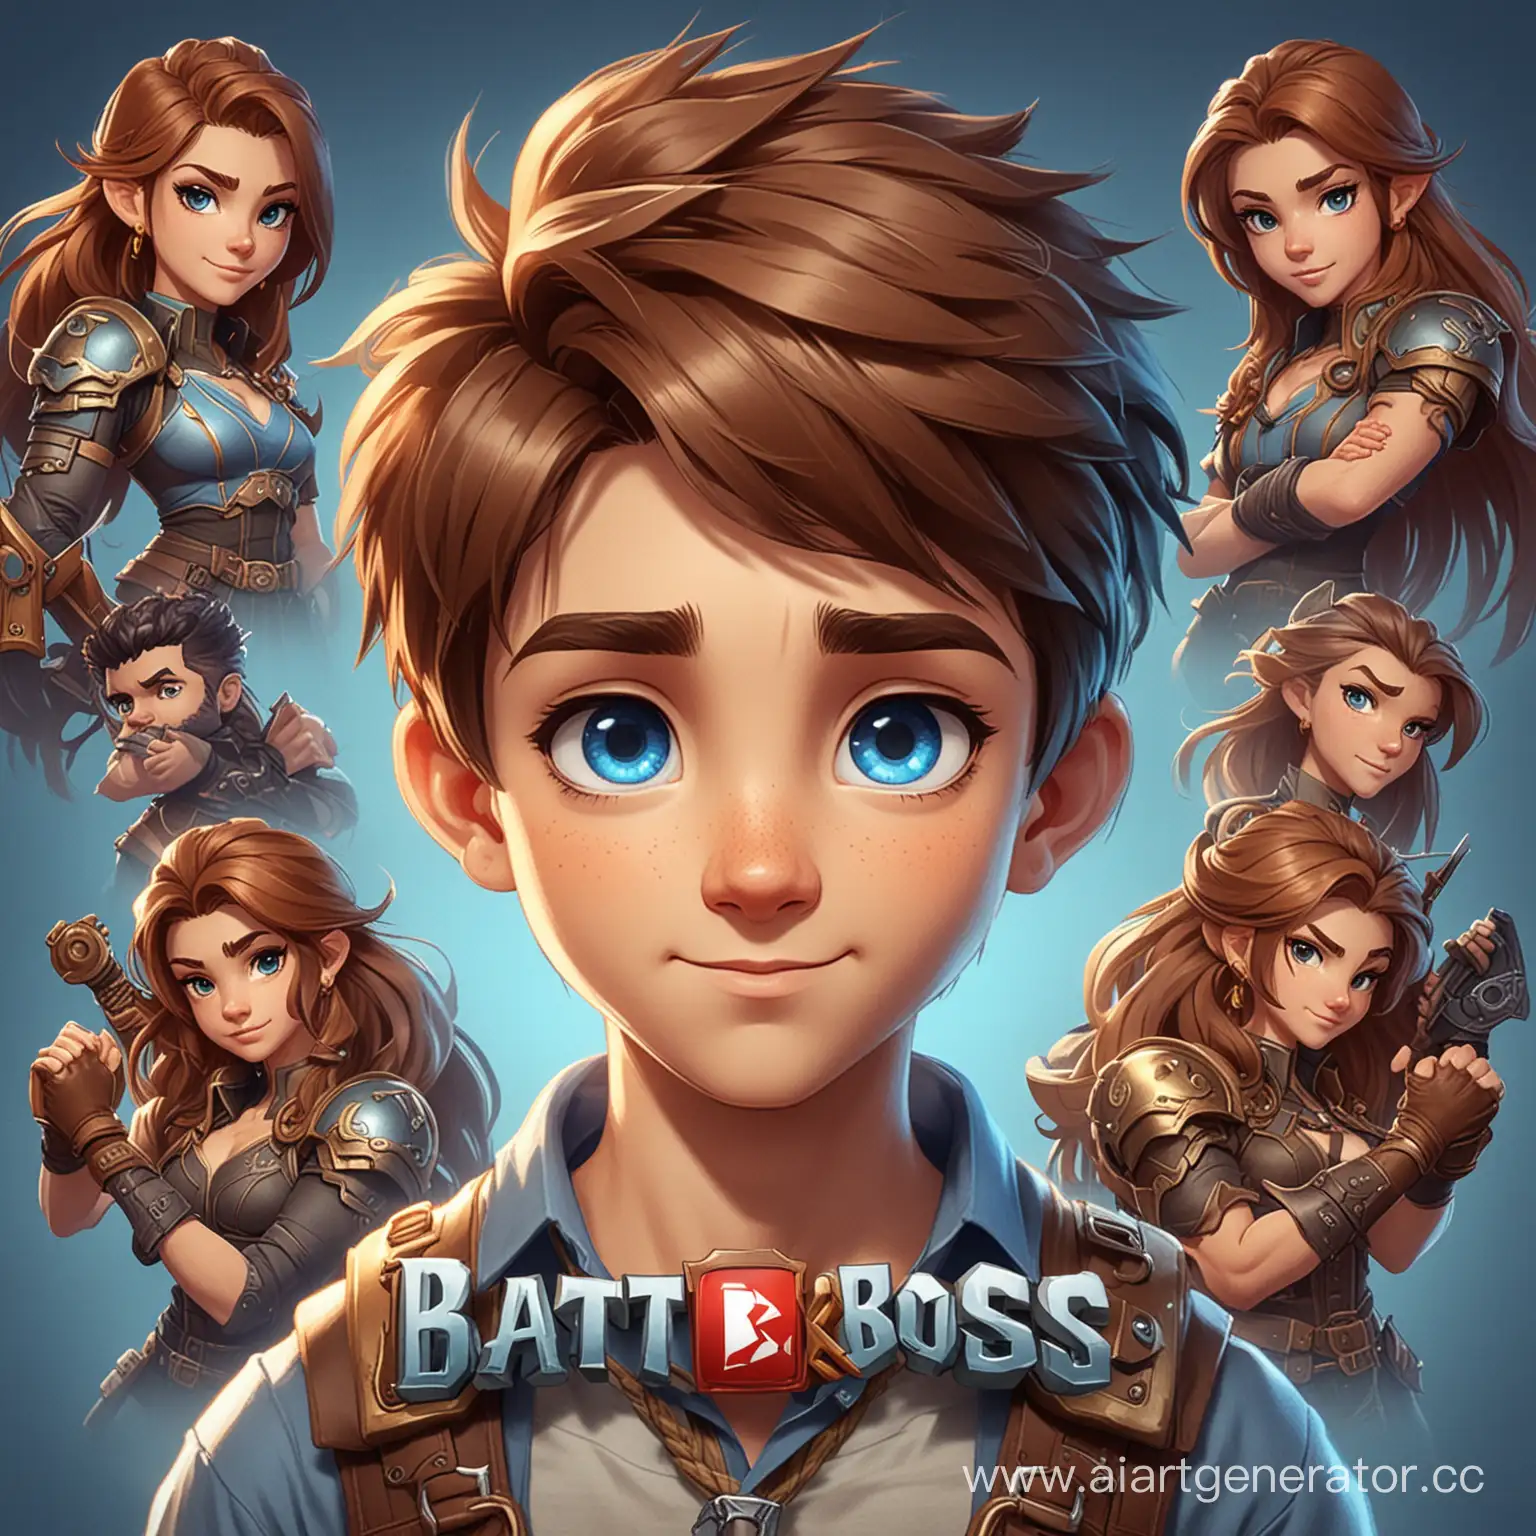 Cartoon-Boy-Avatar-Battle-Boss-with-Brown-Hair-and-Blue-Eyes-for-Gaming-YouTube-Channel